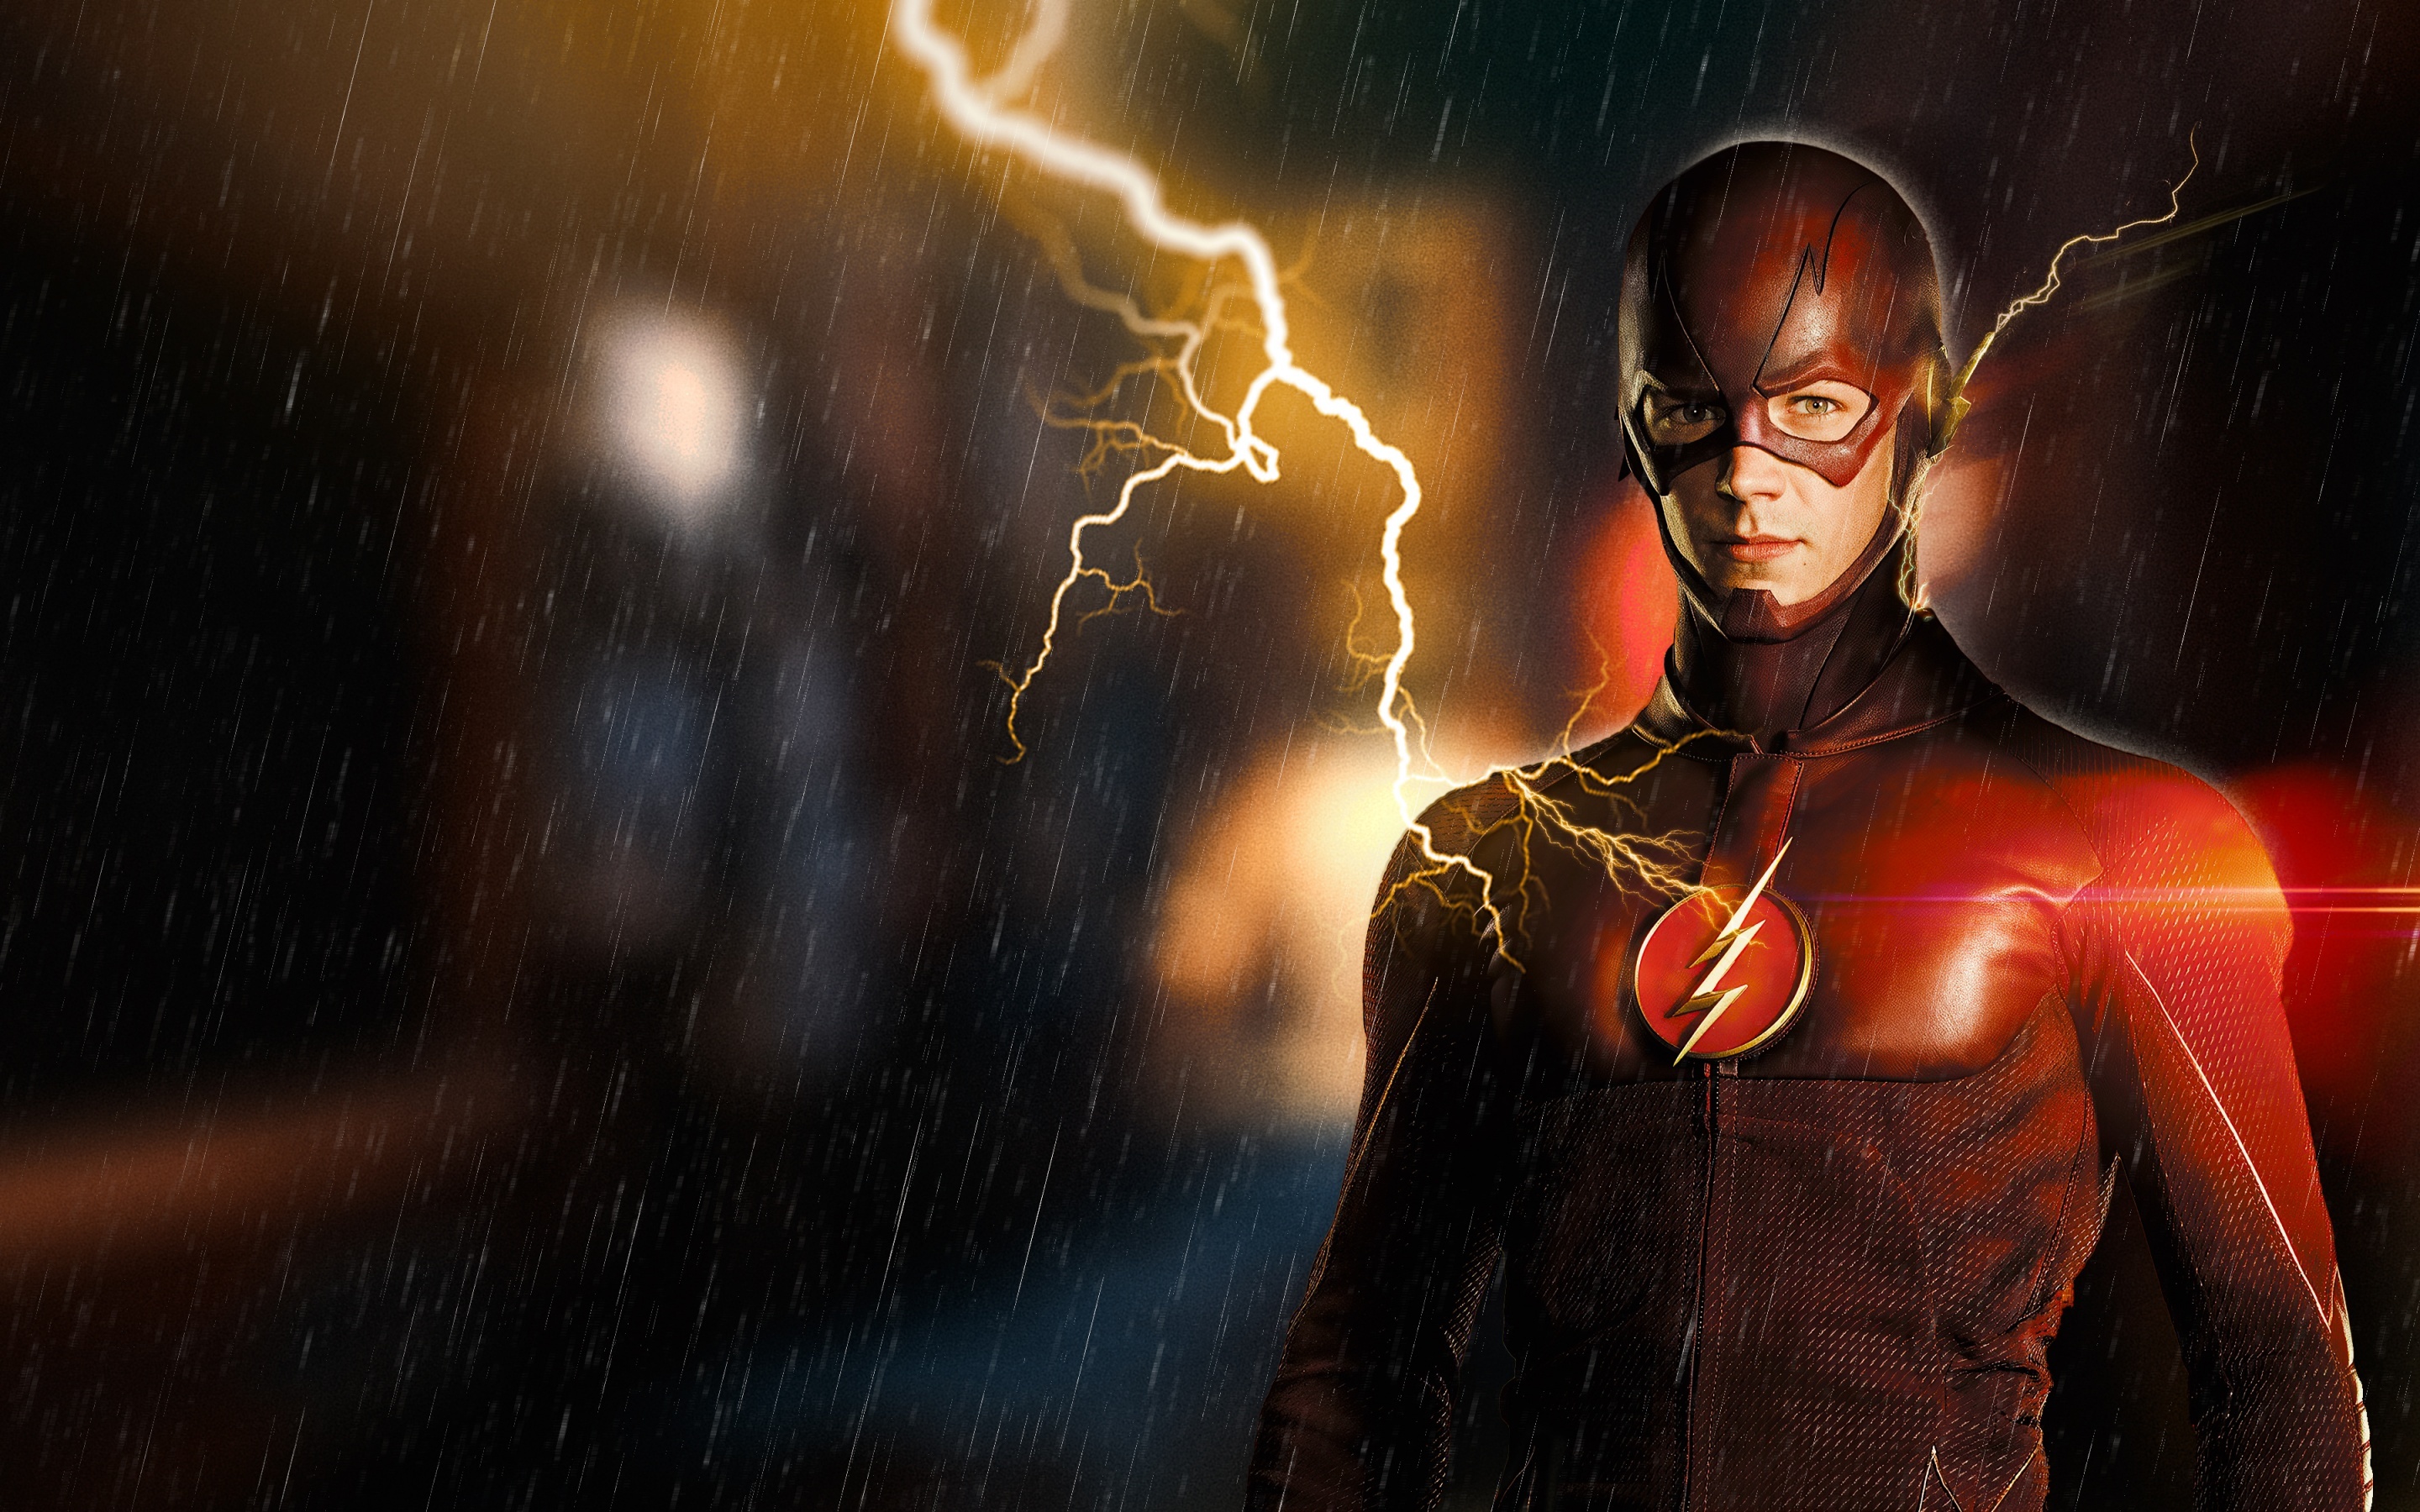 Grant Gustin: The Flash, DC Comics, Superheroes, Movies, A character created by Robert Kanigher and Carmine Infantino. 2880x1800 HD Background.